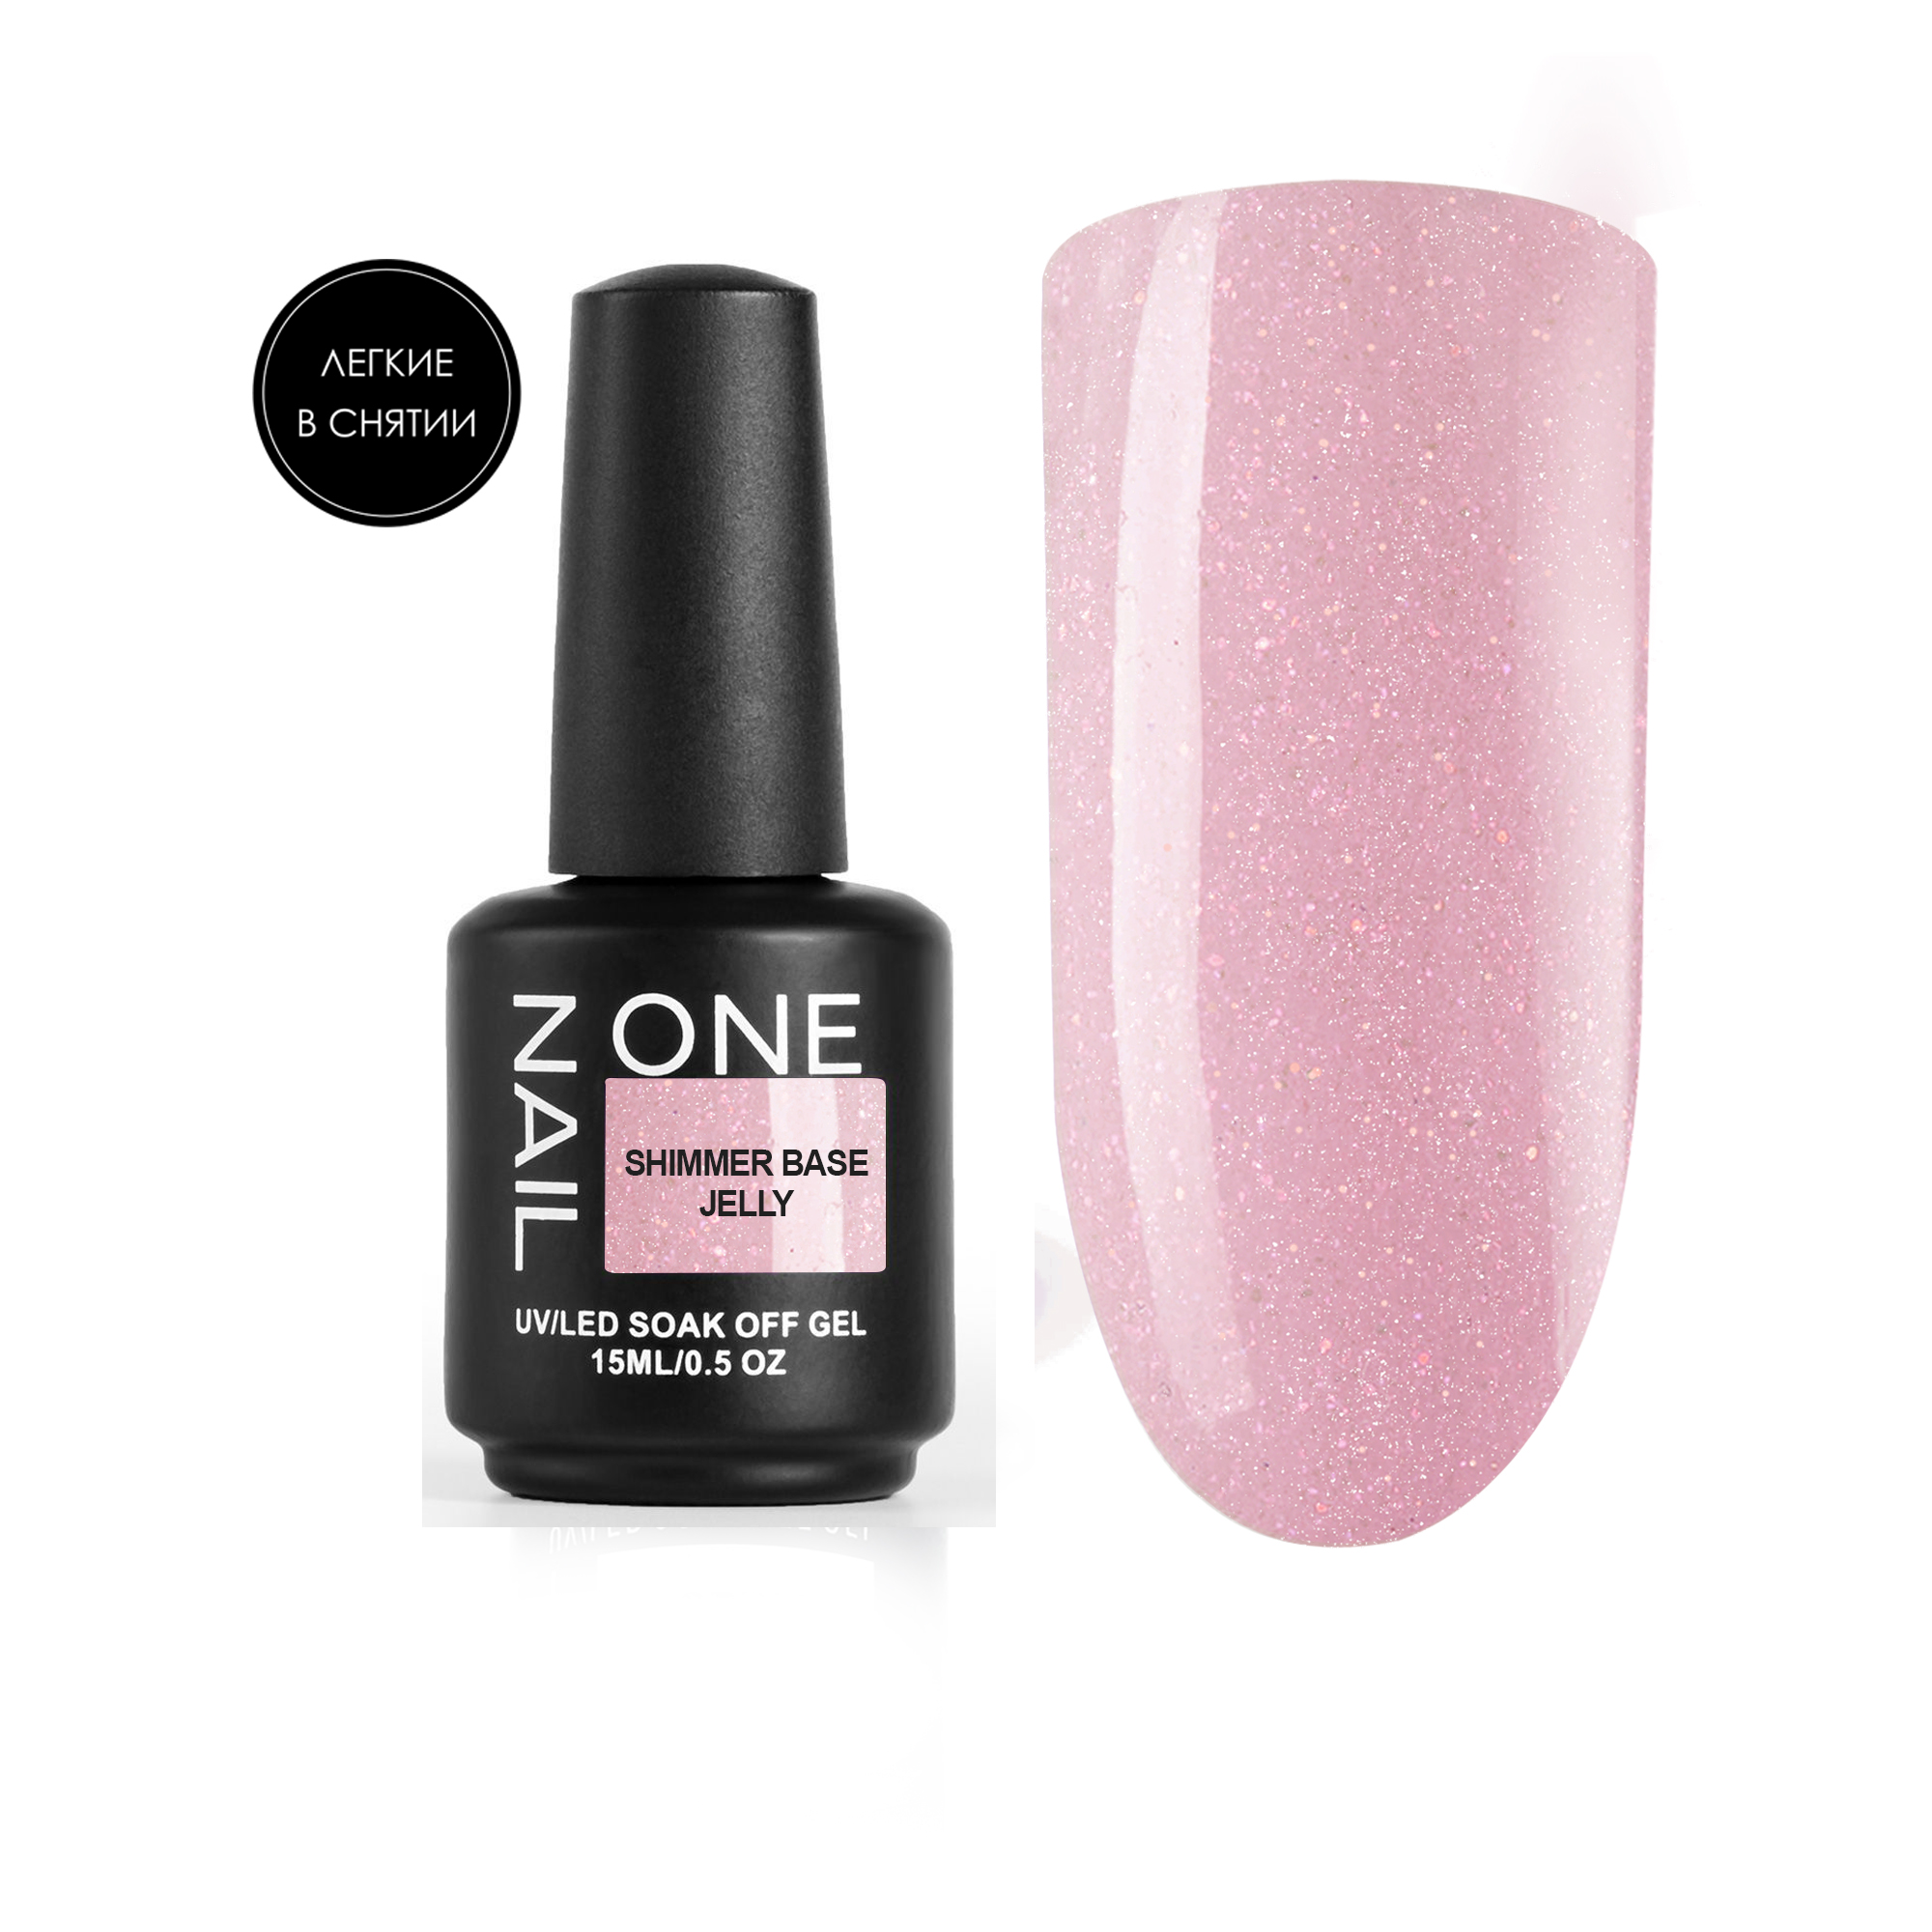 One Nail Shimmer base Jelly15ml